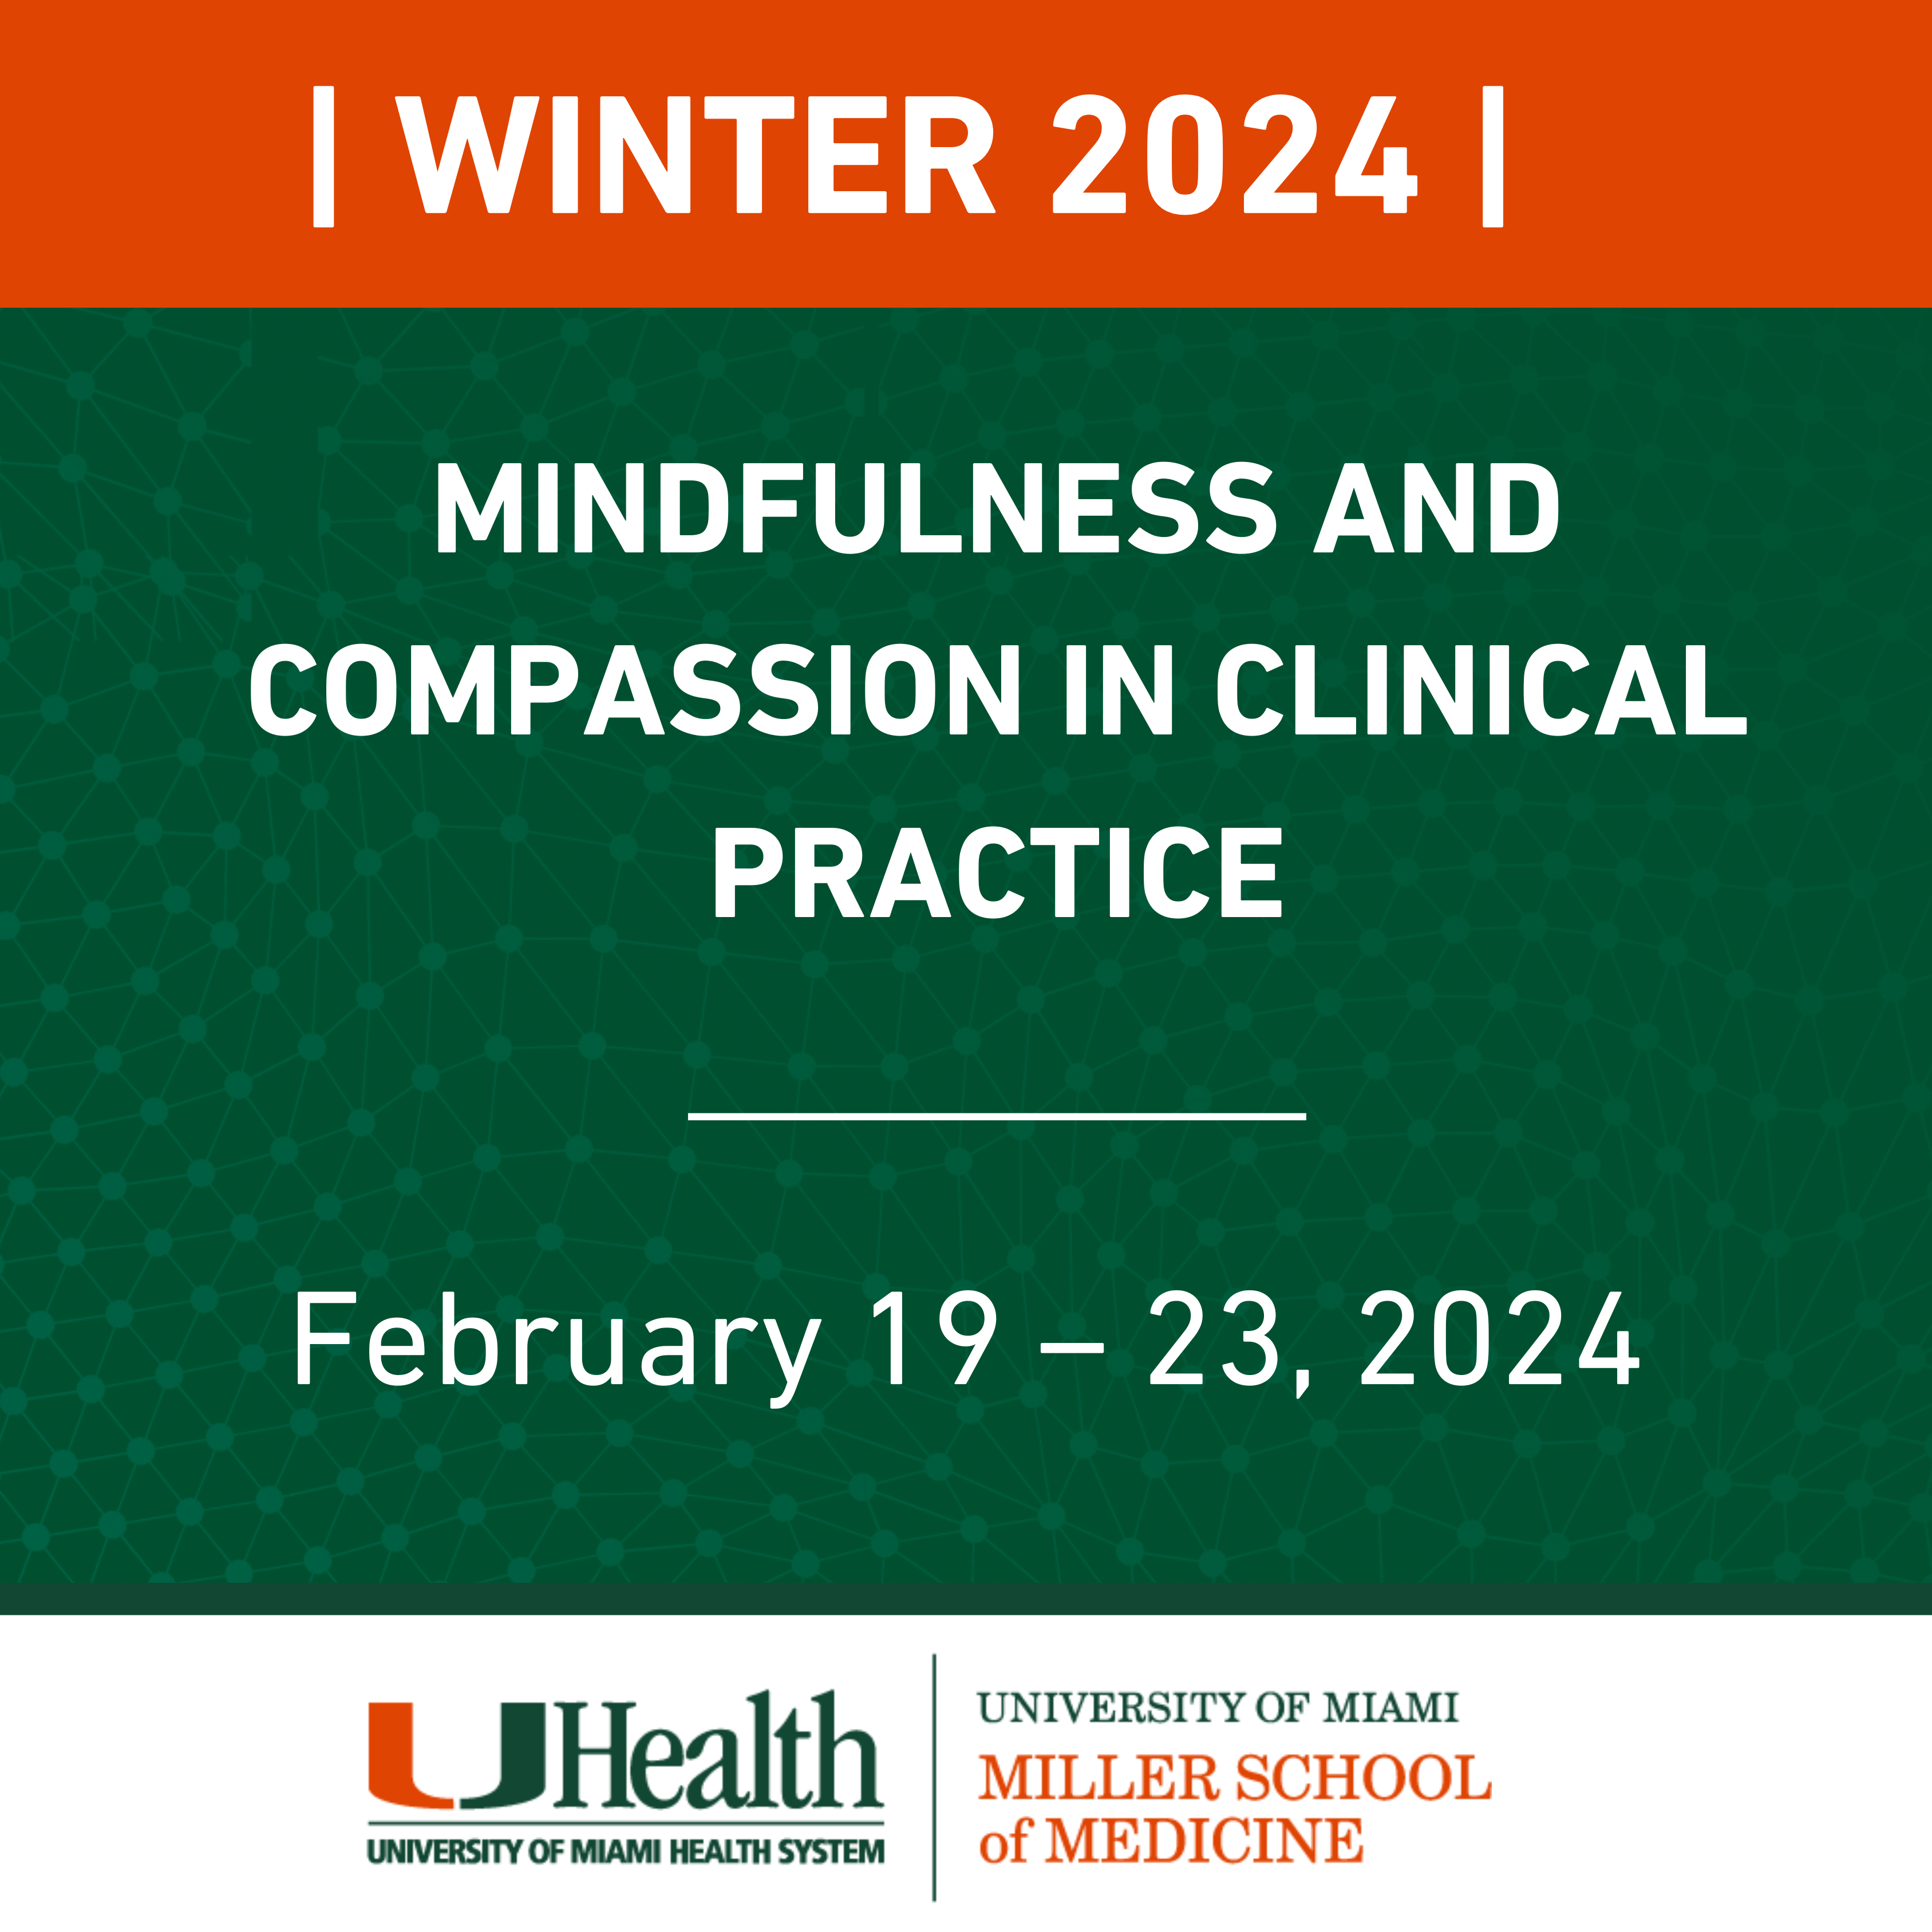 Mindfulness and Compassion in Clinical Practice